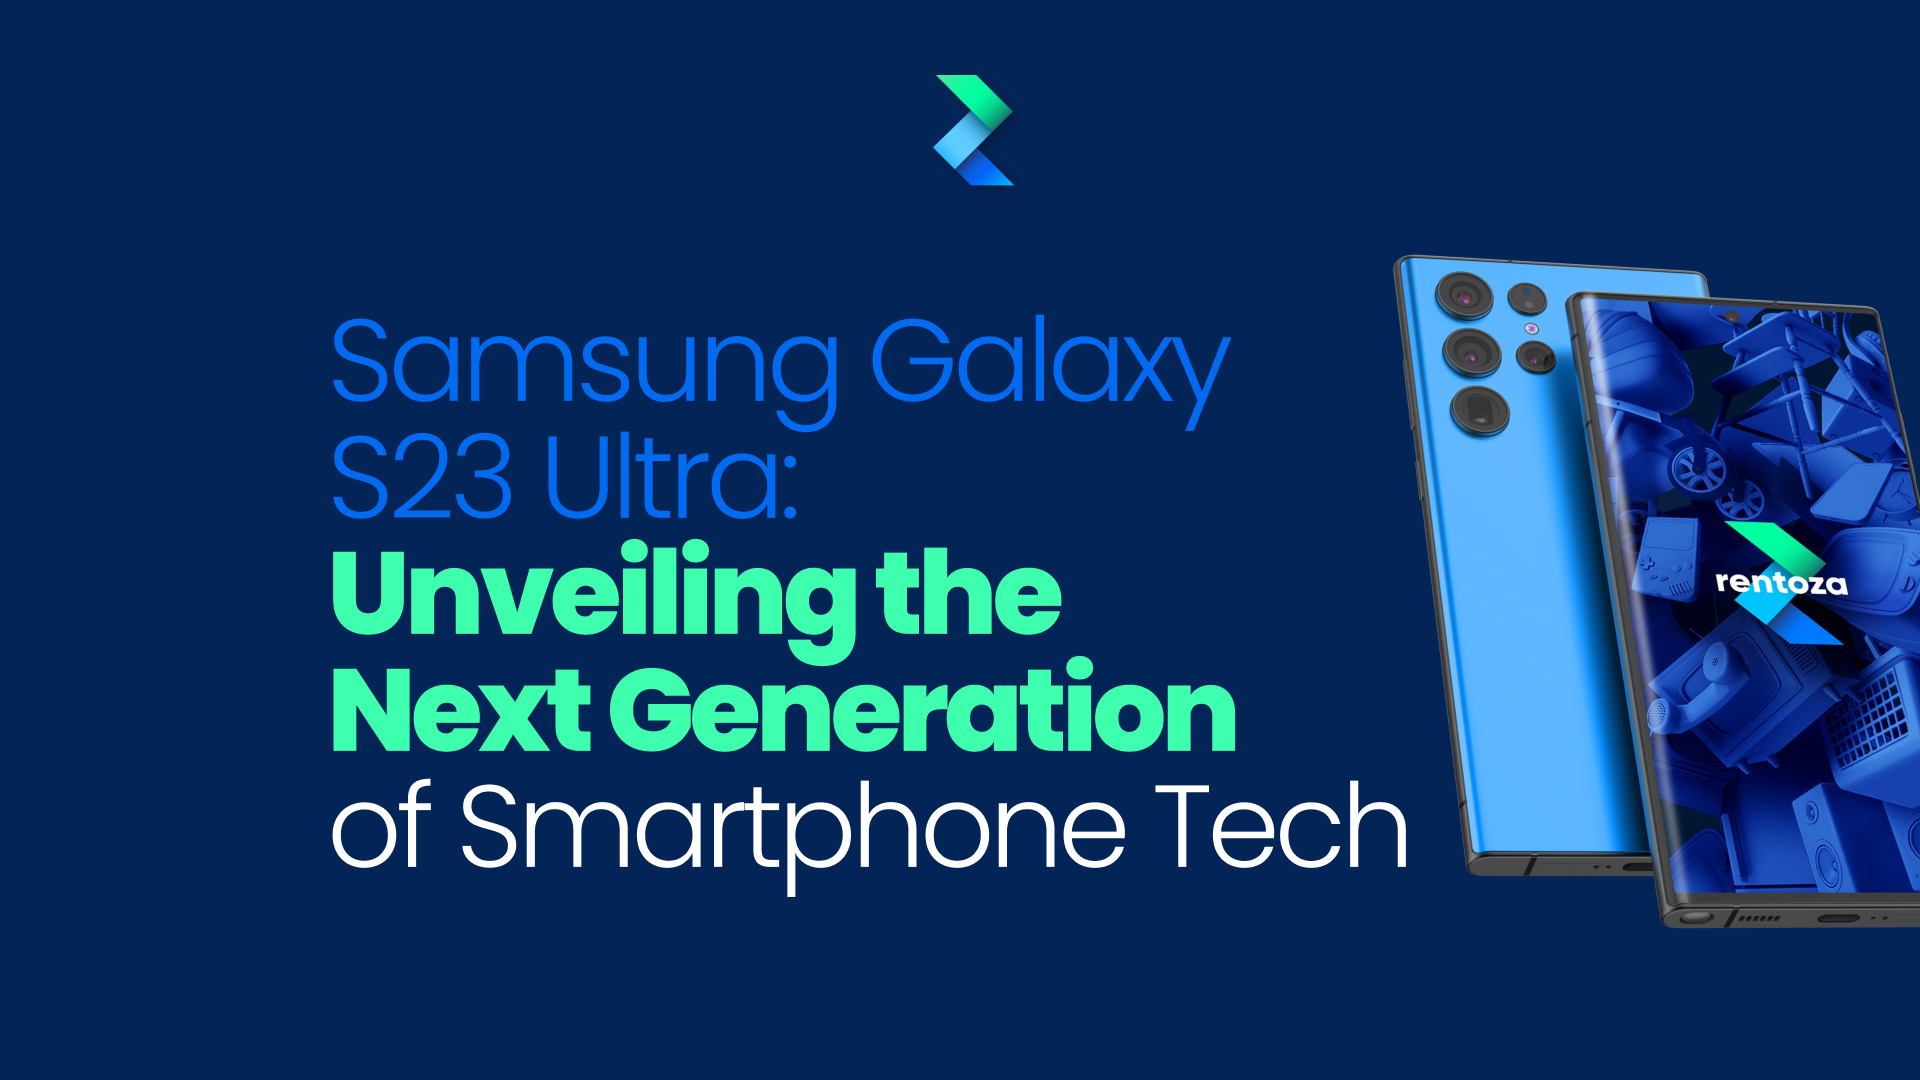 Samsung Galaxy S23 Ultra: Unveiling the Next Generation of Smartphone Technology